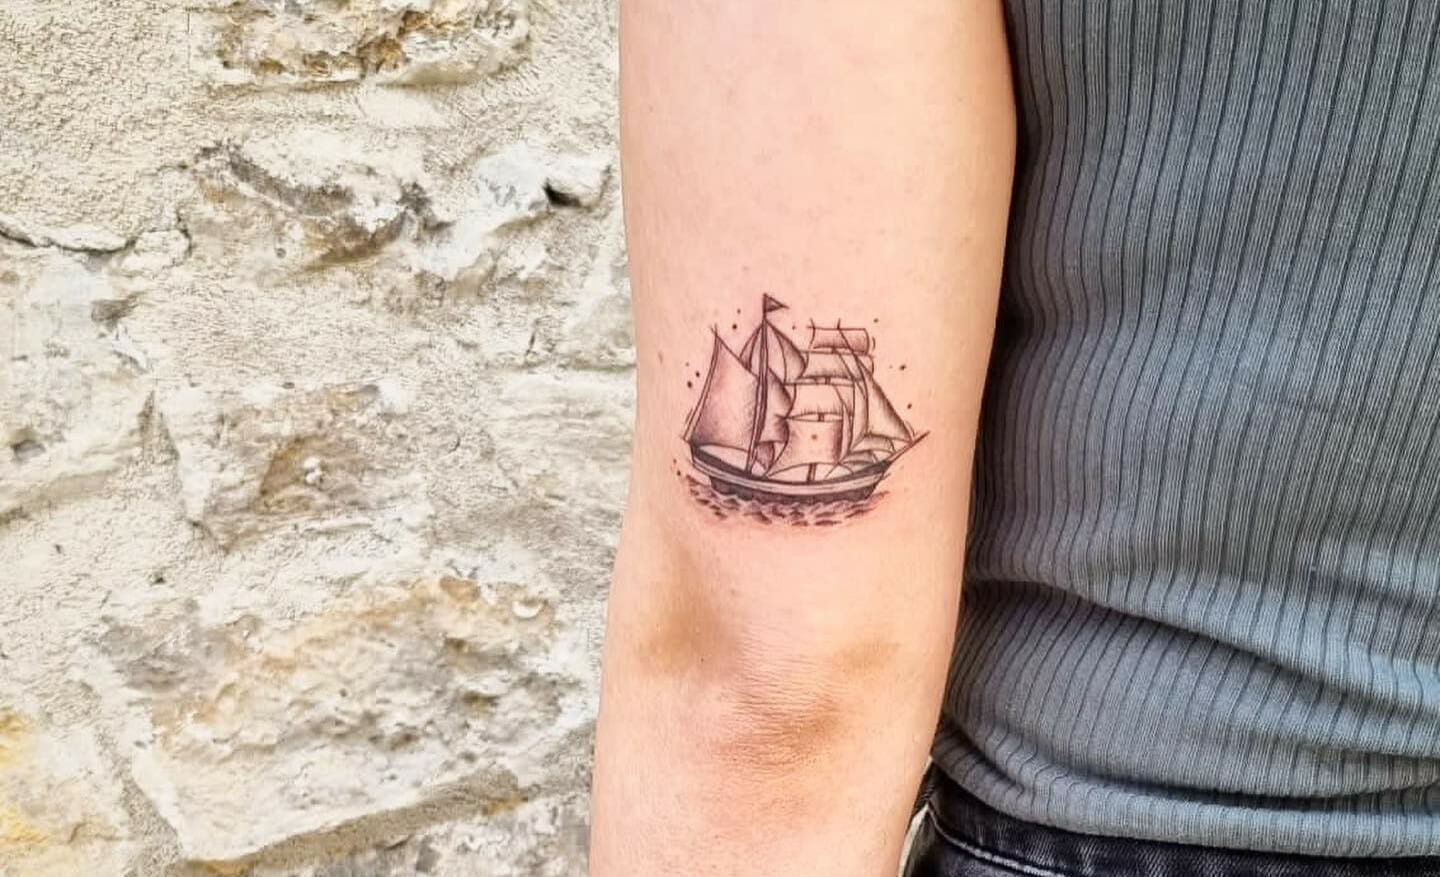 Discover 195+ small navy tattoos latest